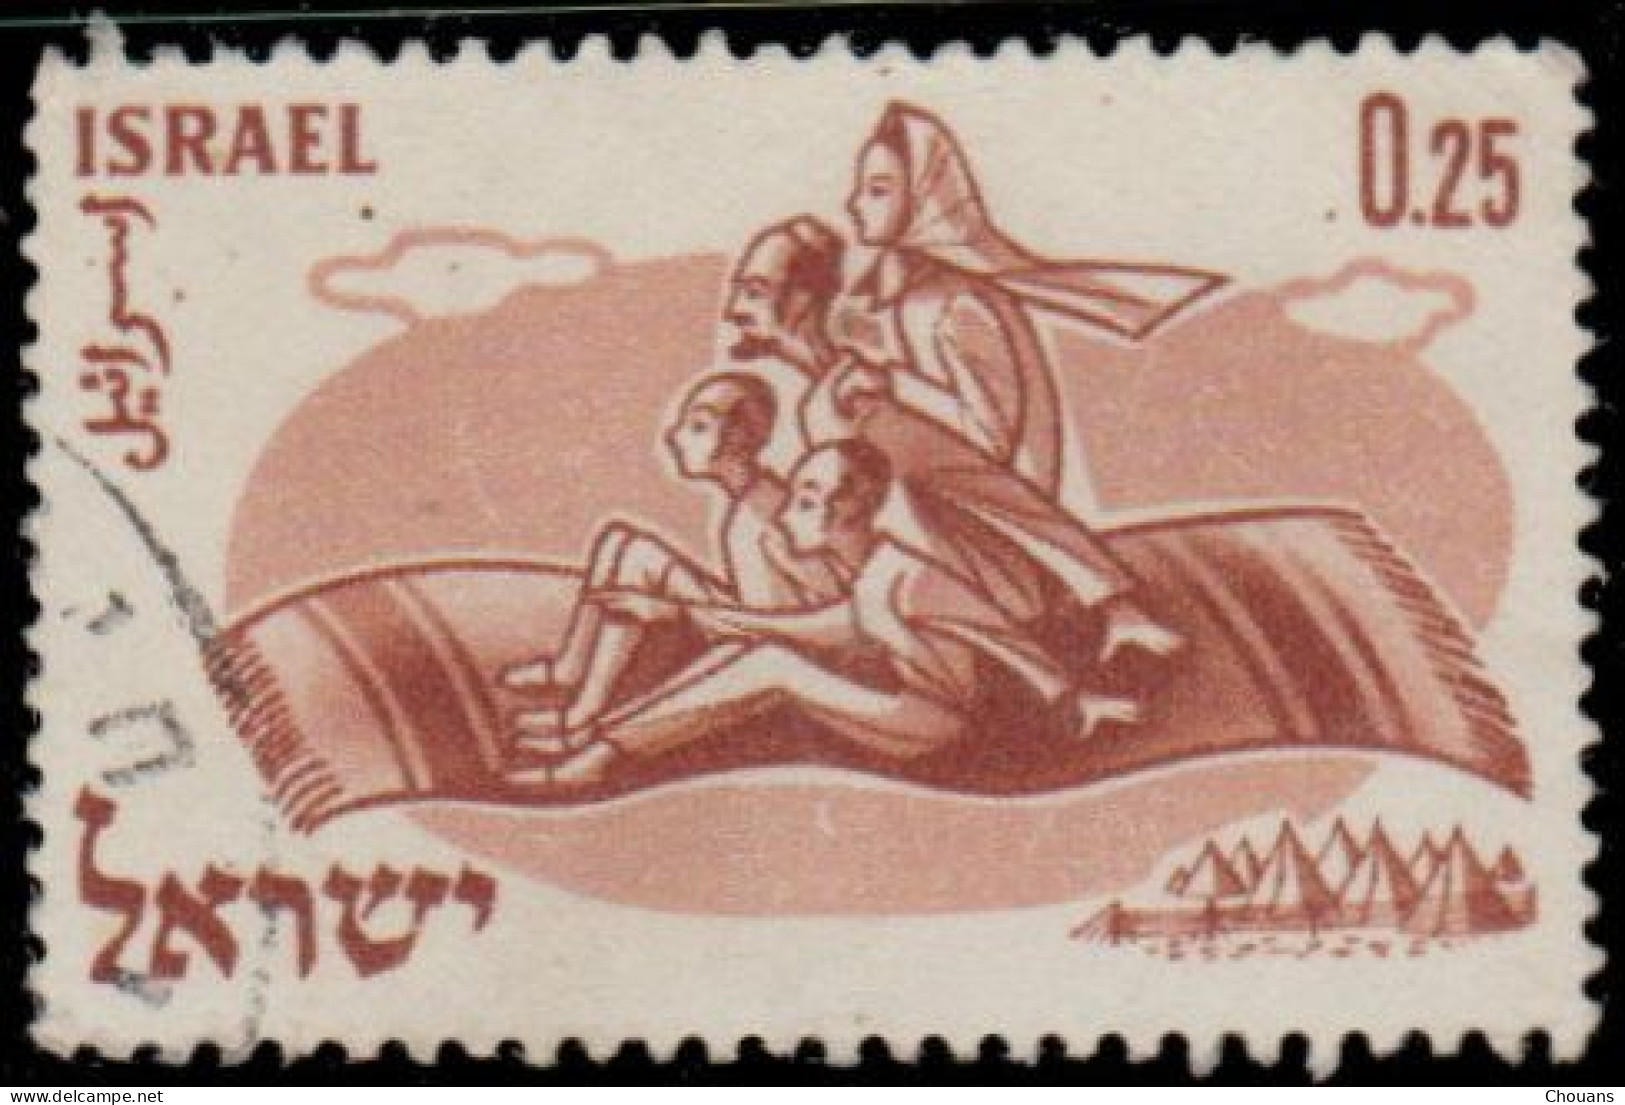 Israël 1960. ~ YT 174 - Opération "Tapis Volant". Année Mondiale Réfugié - Used Stamps (without Tabs)